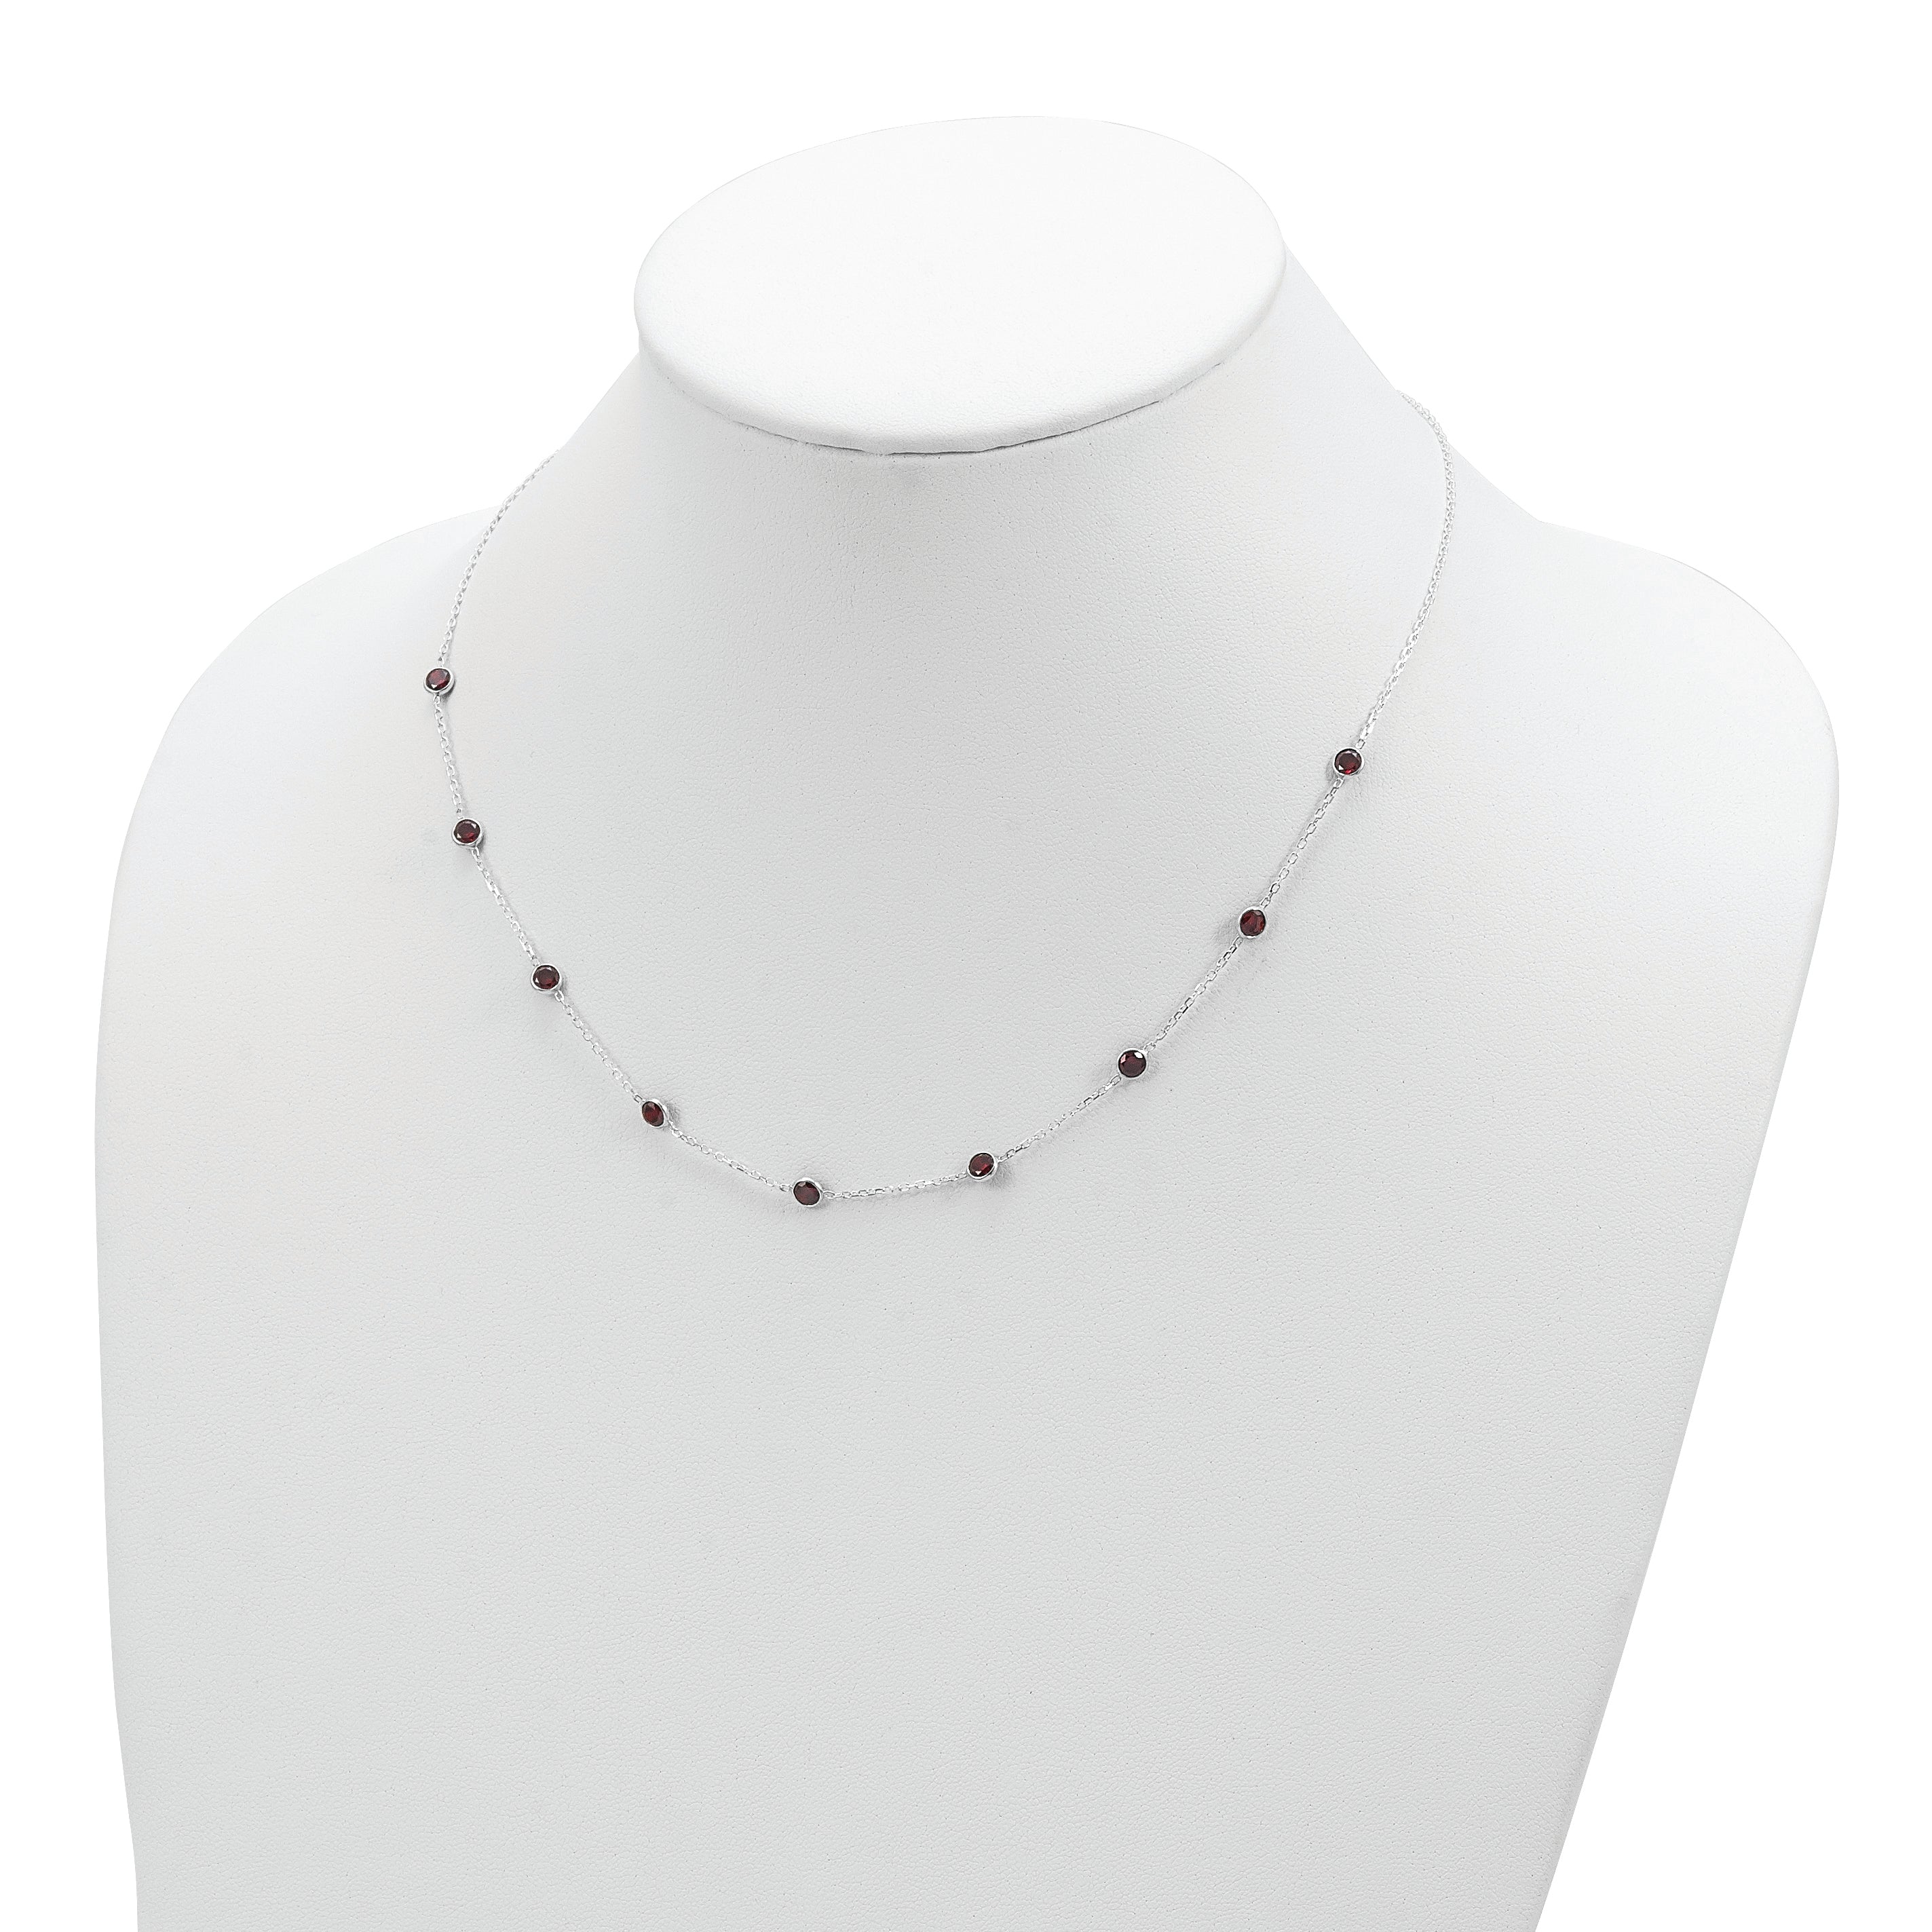 Sterling Silver 9-Station Red CZ Necklace